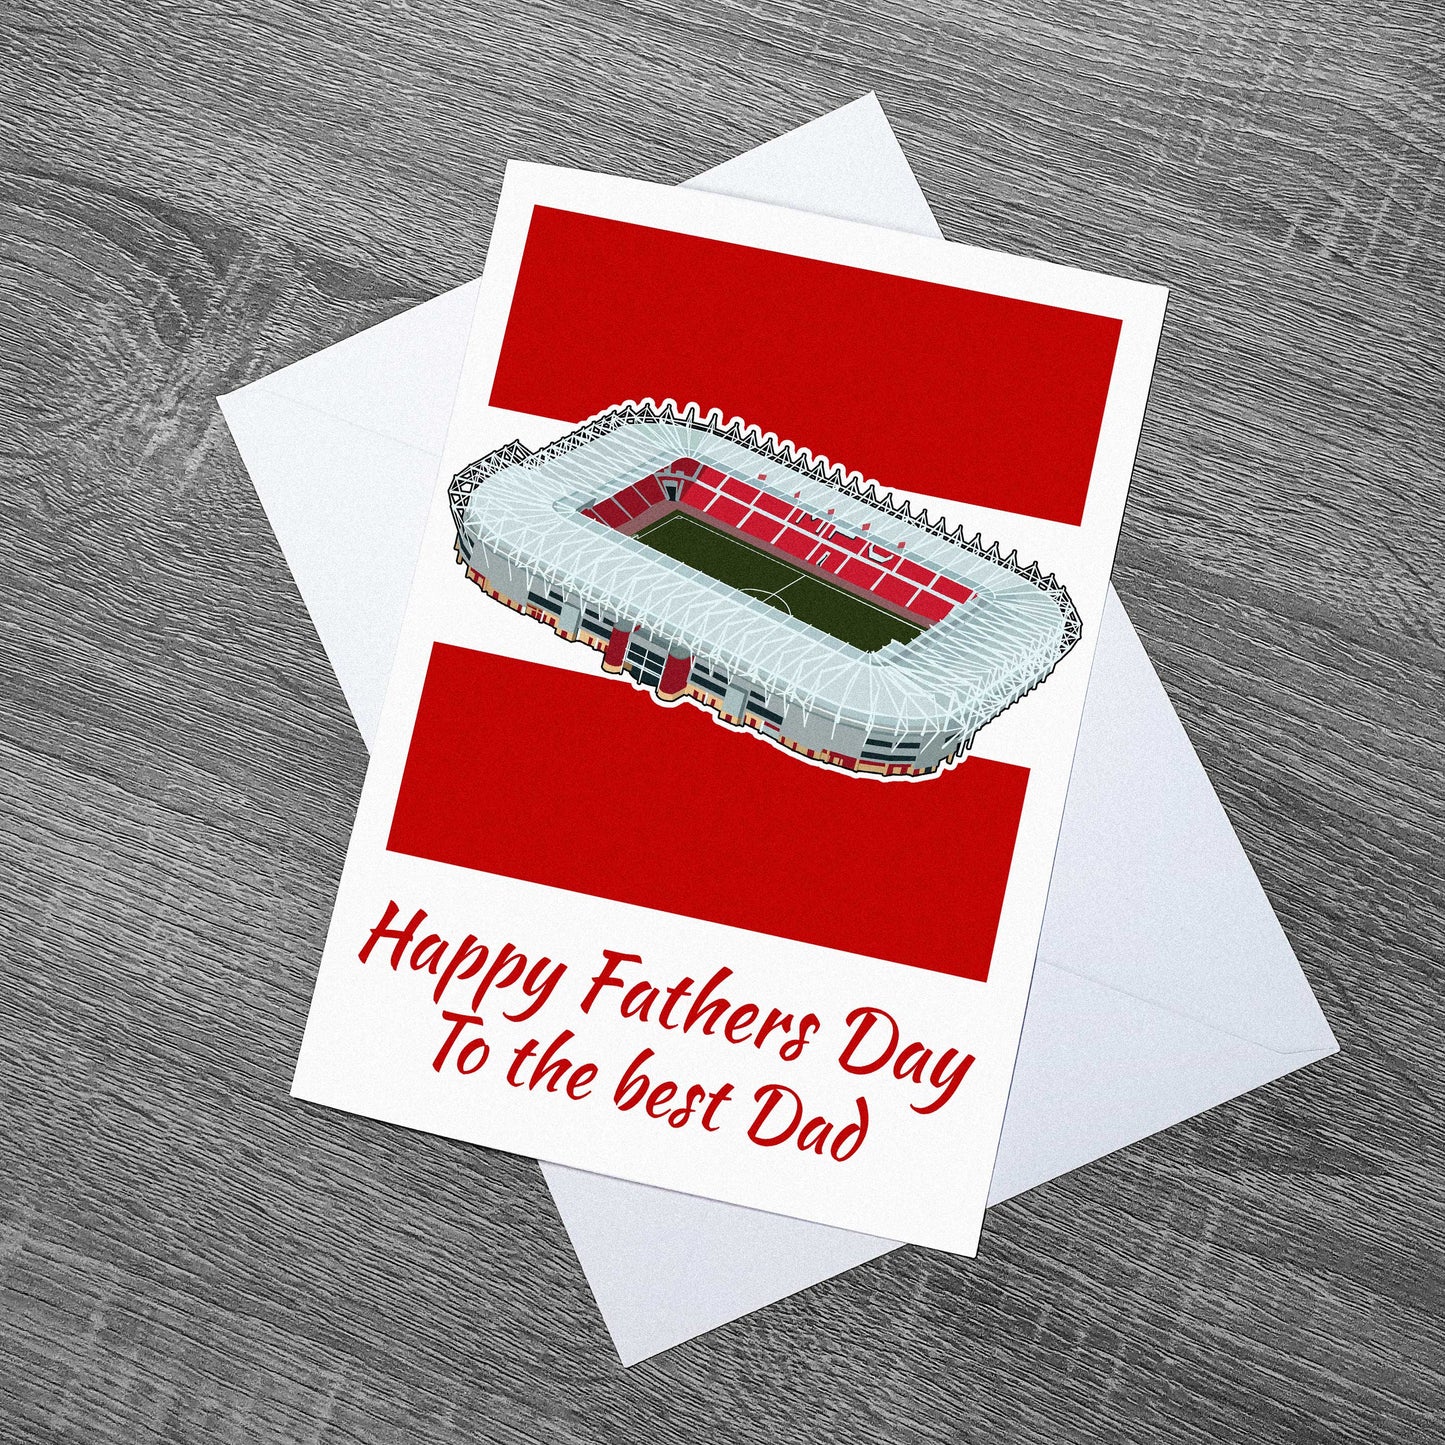 Fathers day card inspired by the Riverside Stadium, the home of Middlesbrough Football Club in North Yorkshire